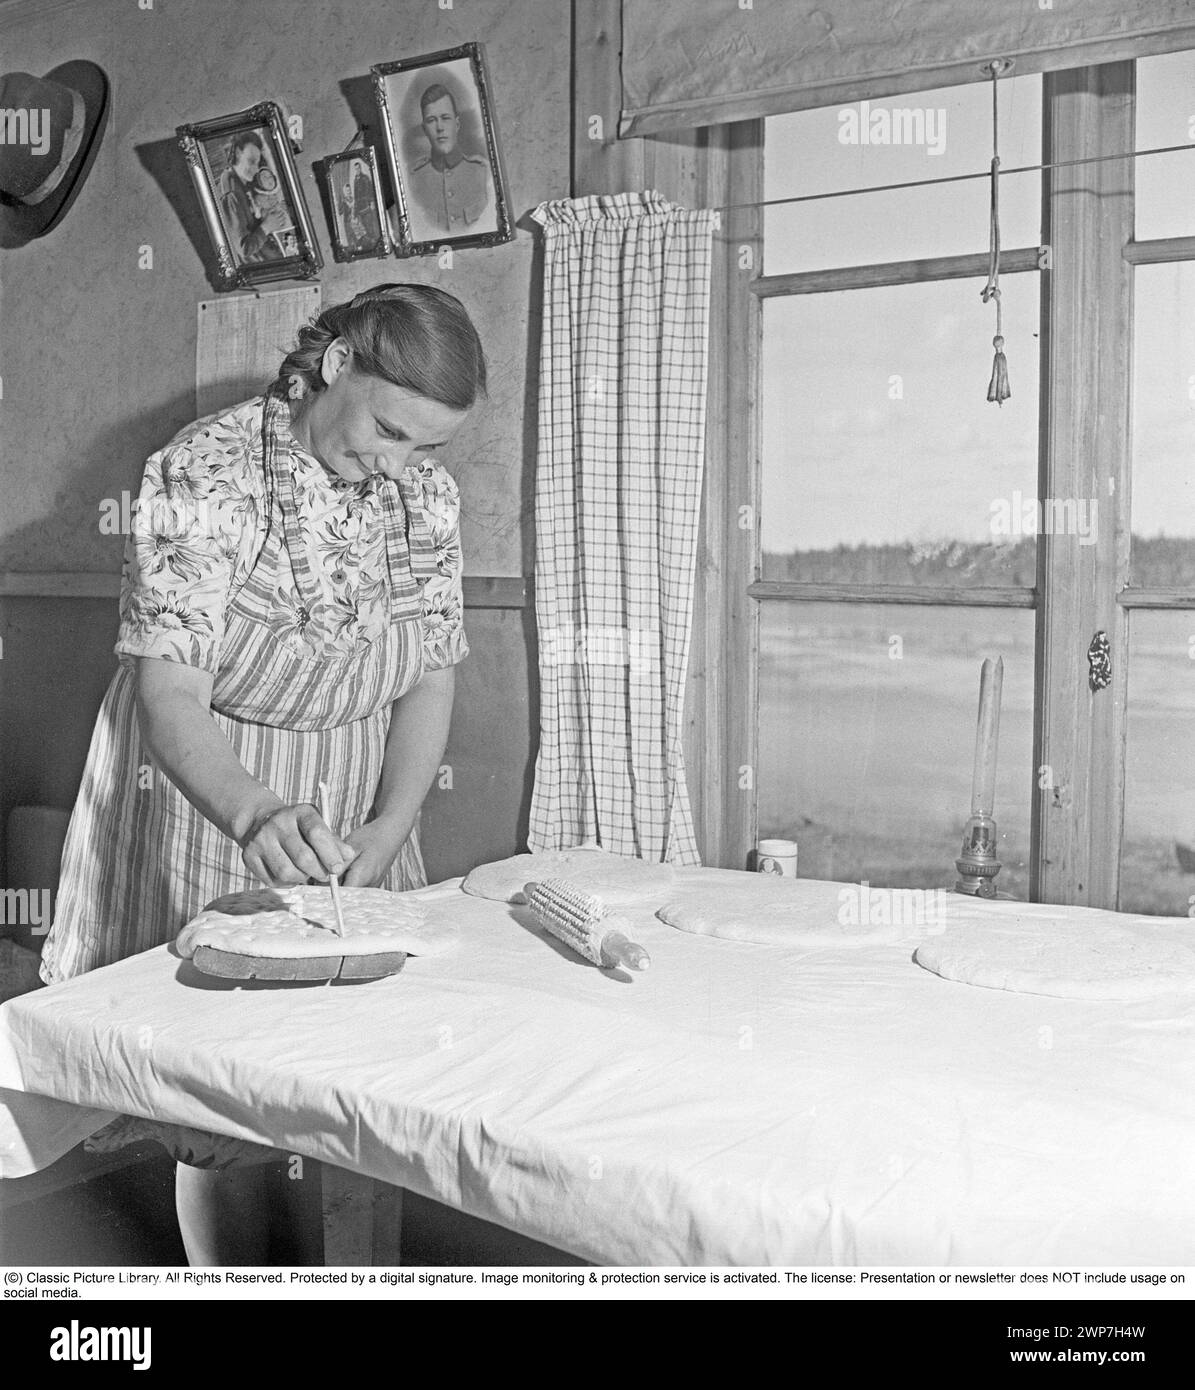 Baking bread 1949. Interior of a kitchen with a woman baking bread. She prepares the dough before putting it into the oven. A rural kitchen in Lapland Sweden 1949. Kristoffersson ref AS83-4 Stock Photo